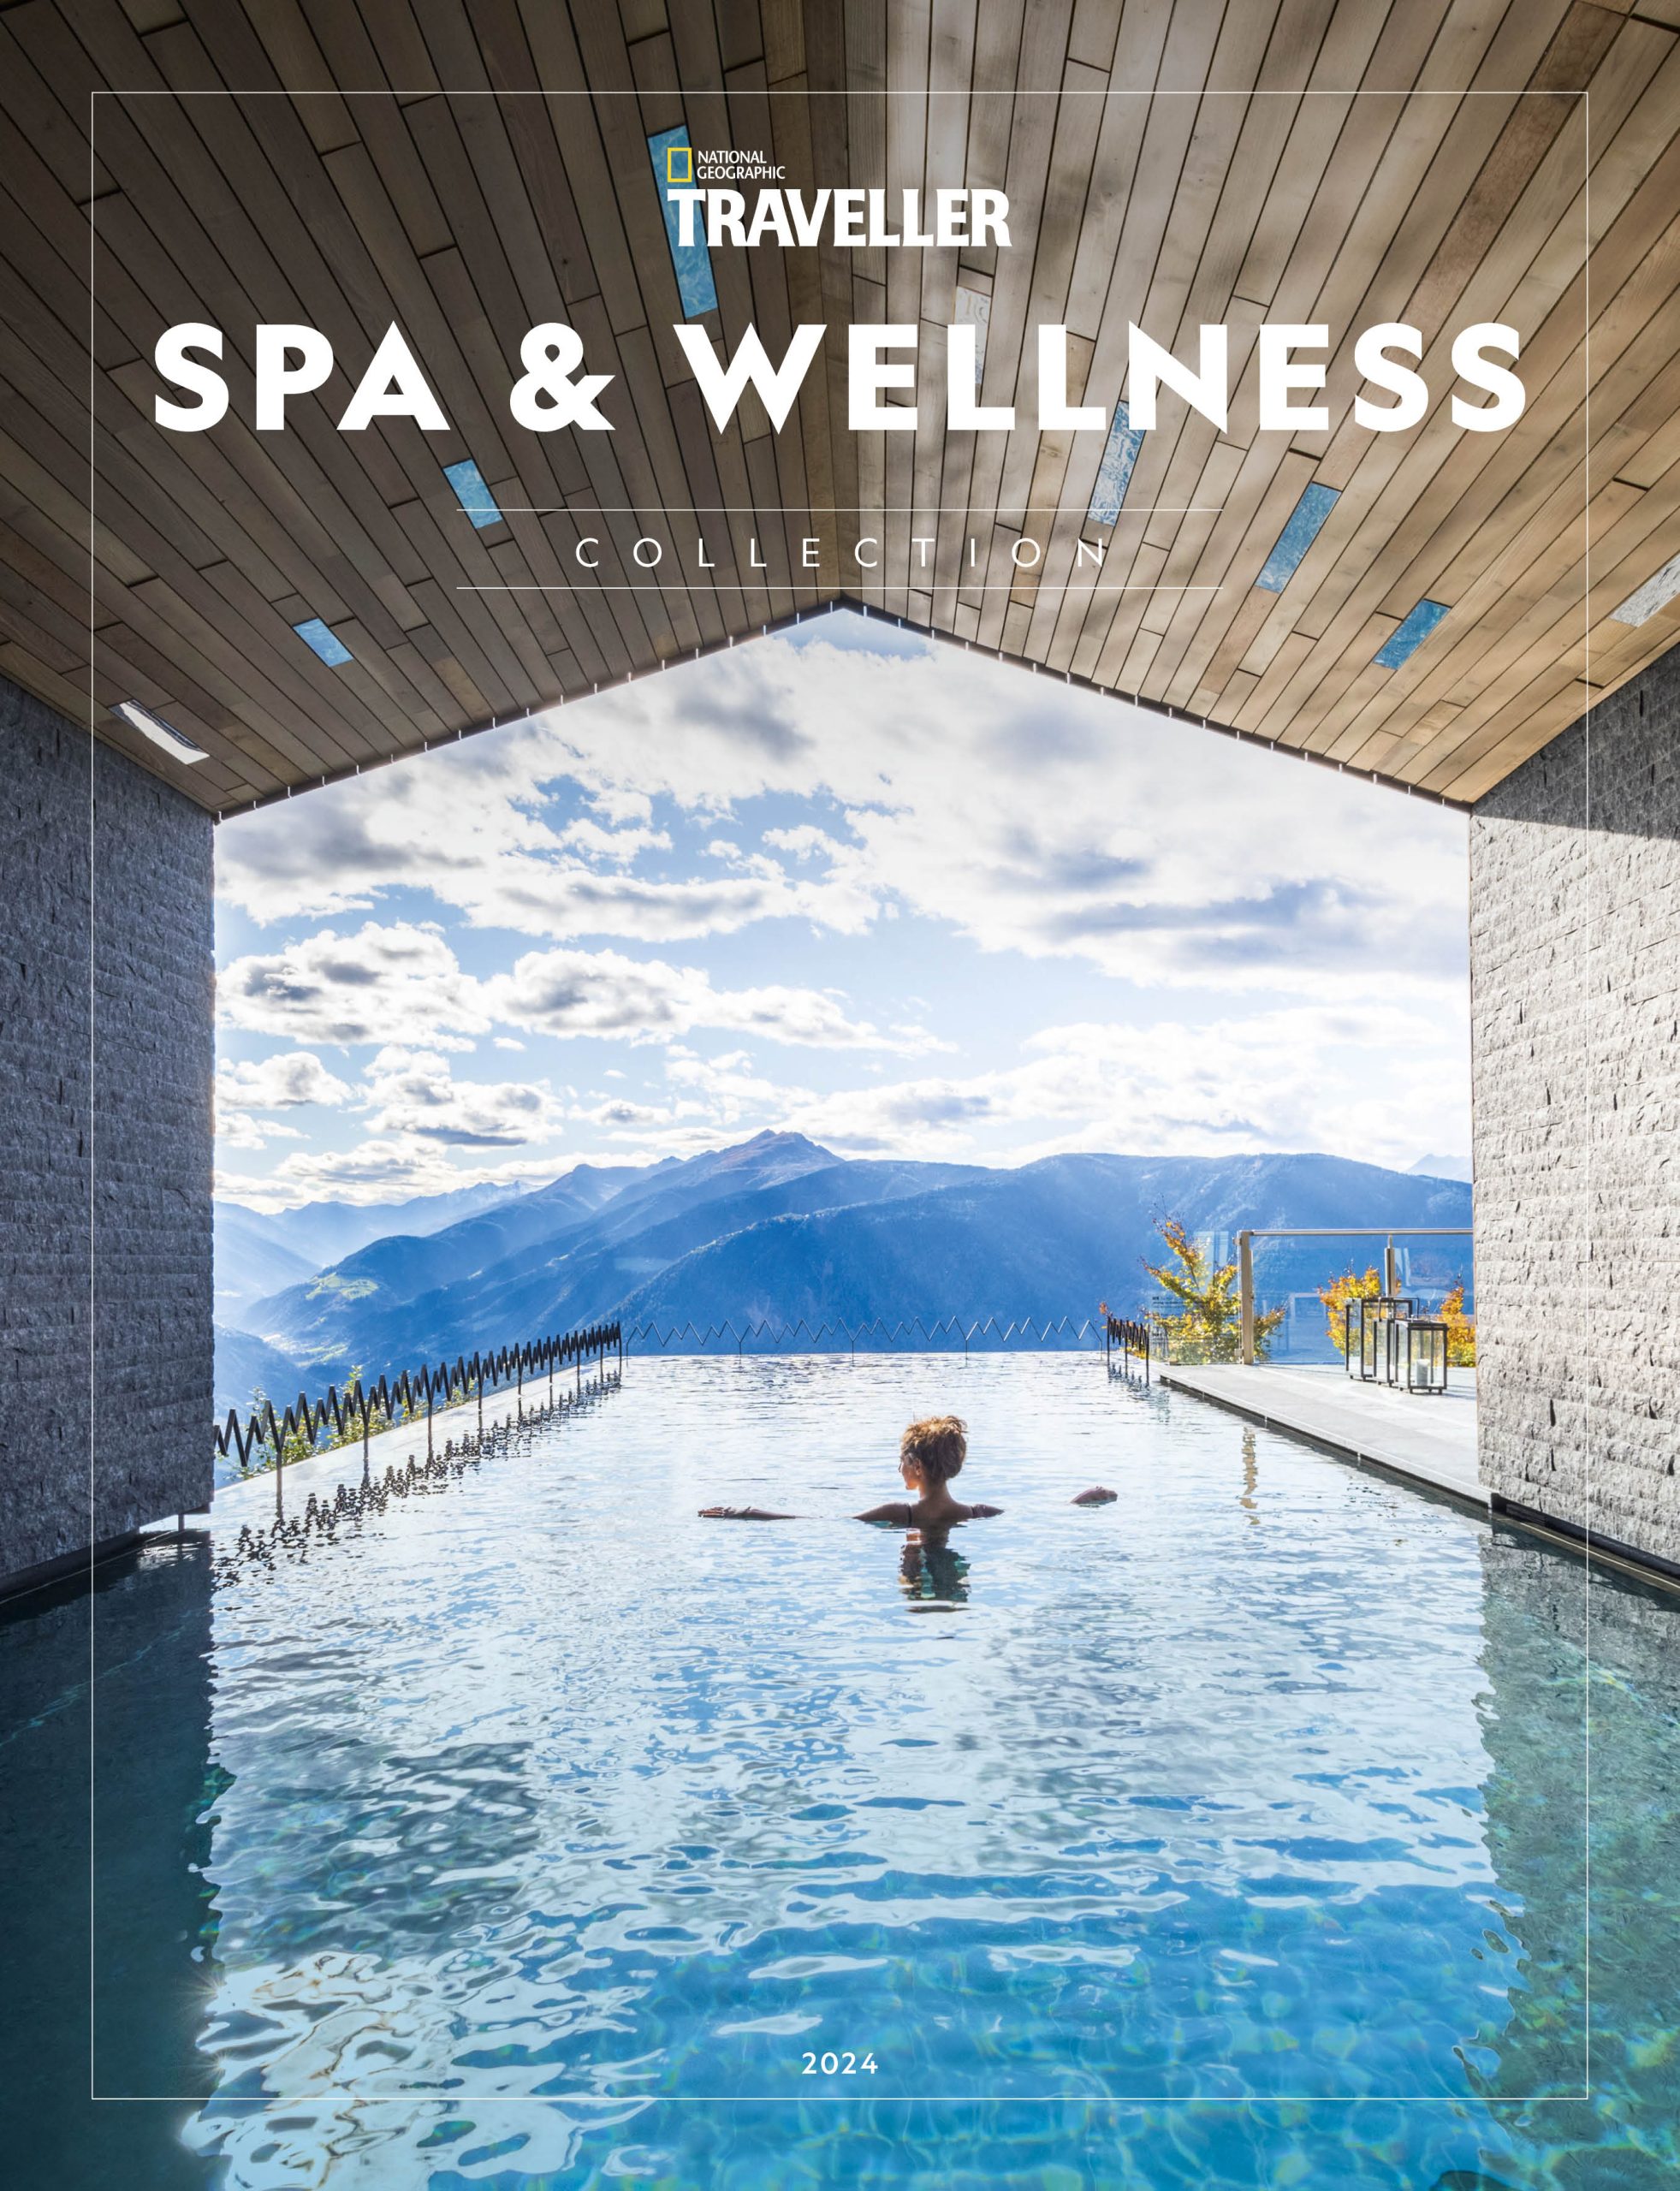 national geographic traveller spa & wellness collection